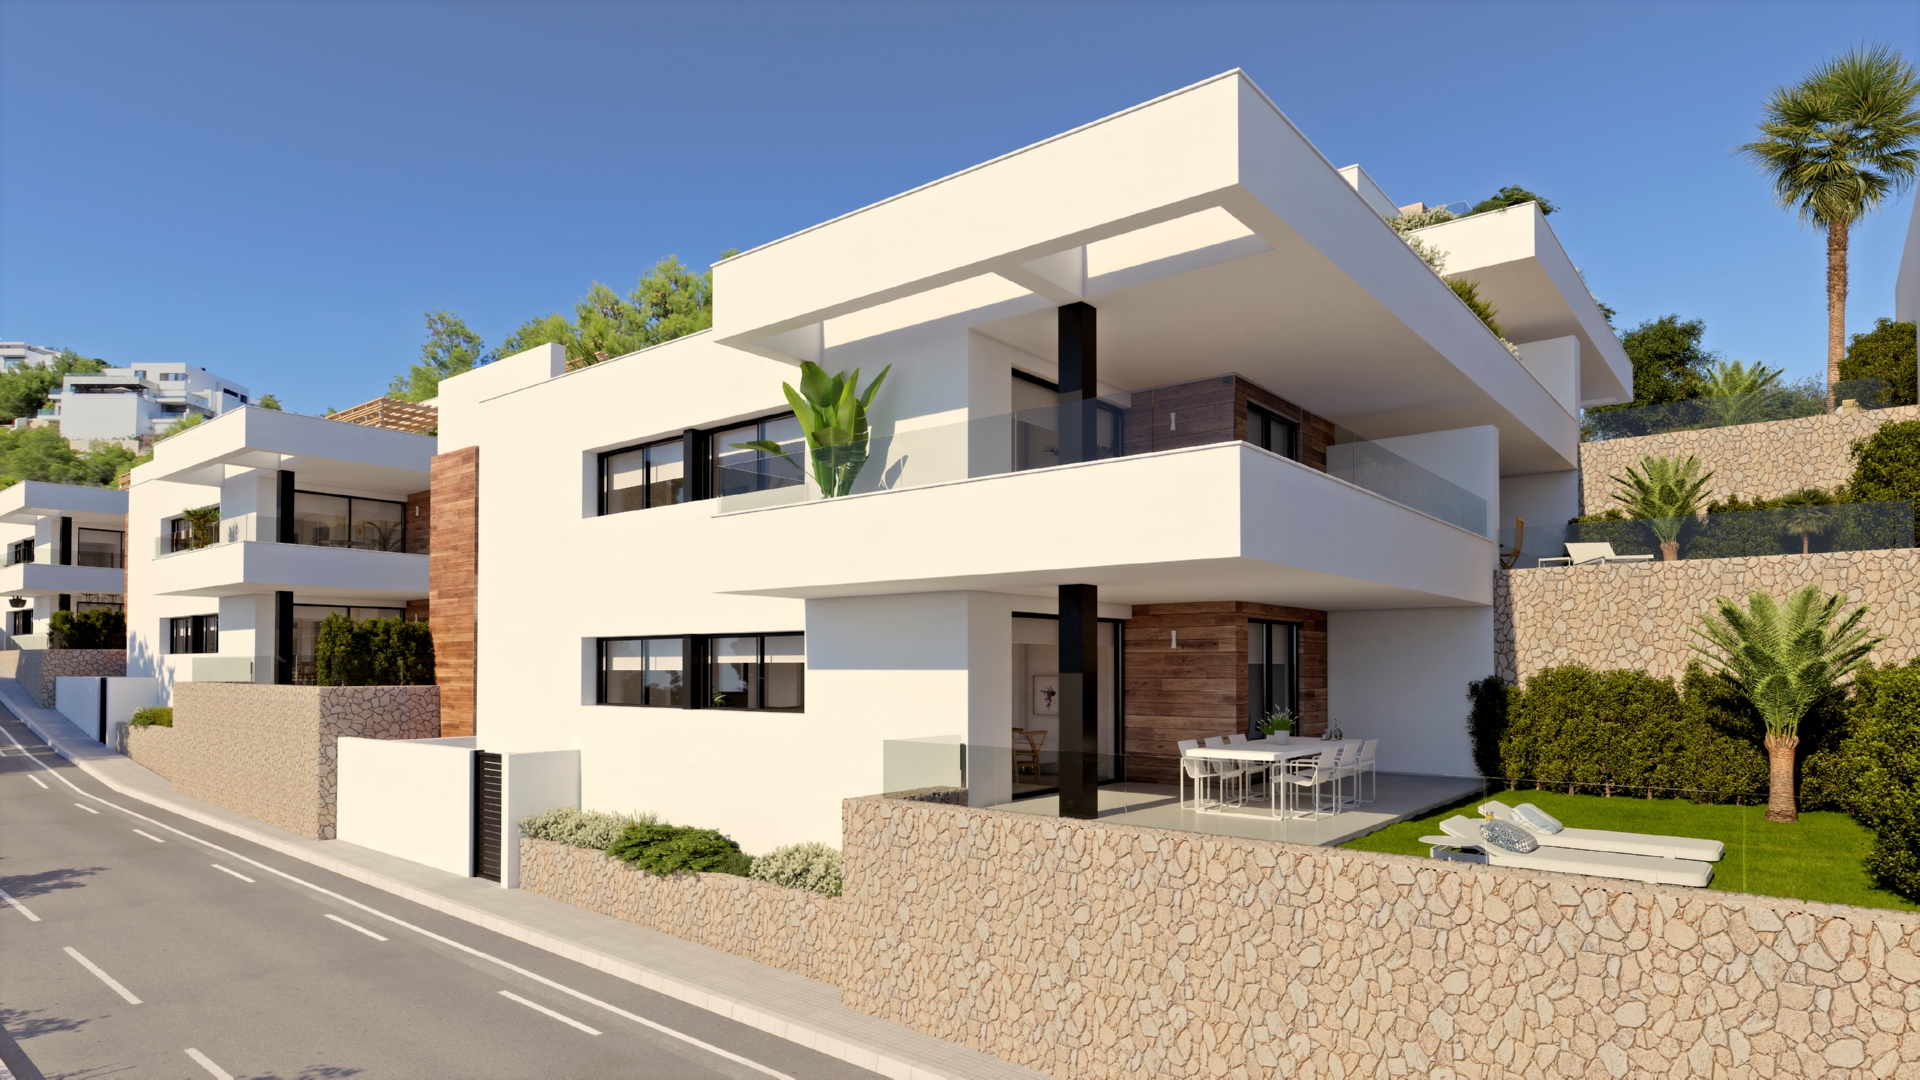 Luxury 3 bed apartments
under construction in
Benitachell